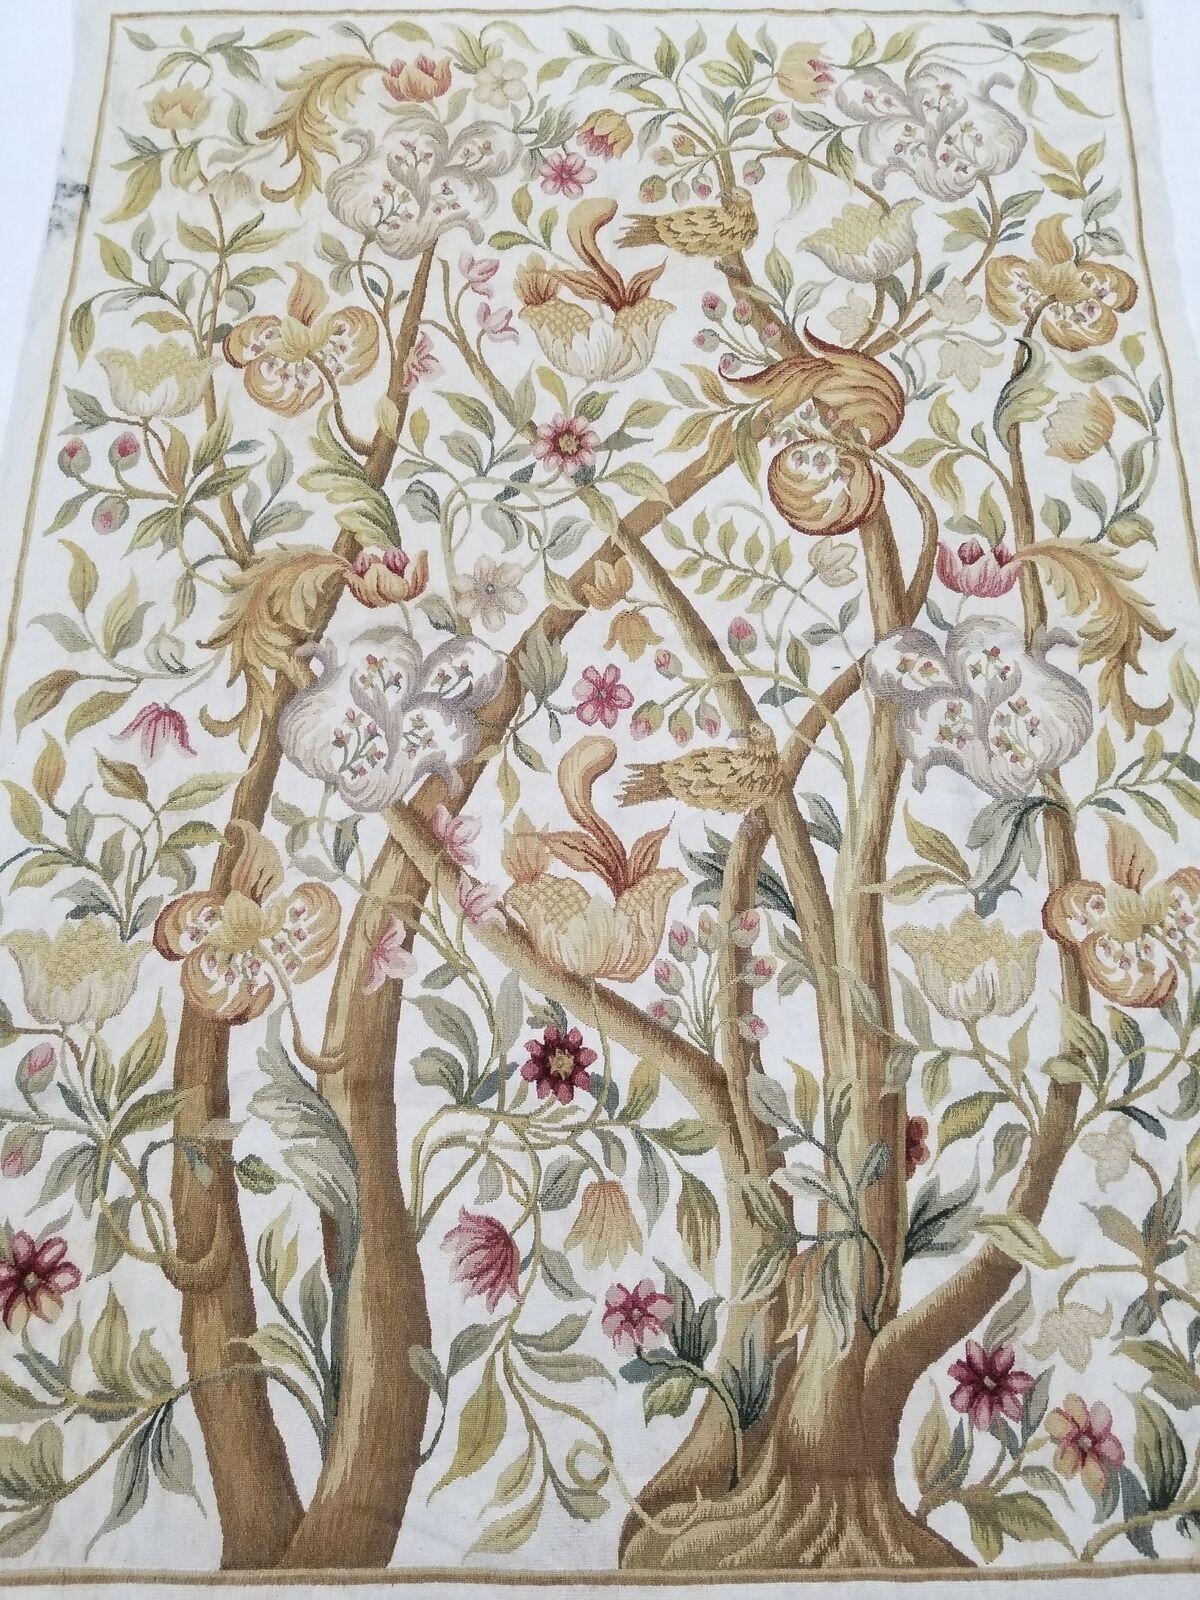 19thc. French Antique Louis XVI style Floral Aubusson Wall Hanging / Tapestry For Sale 8